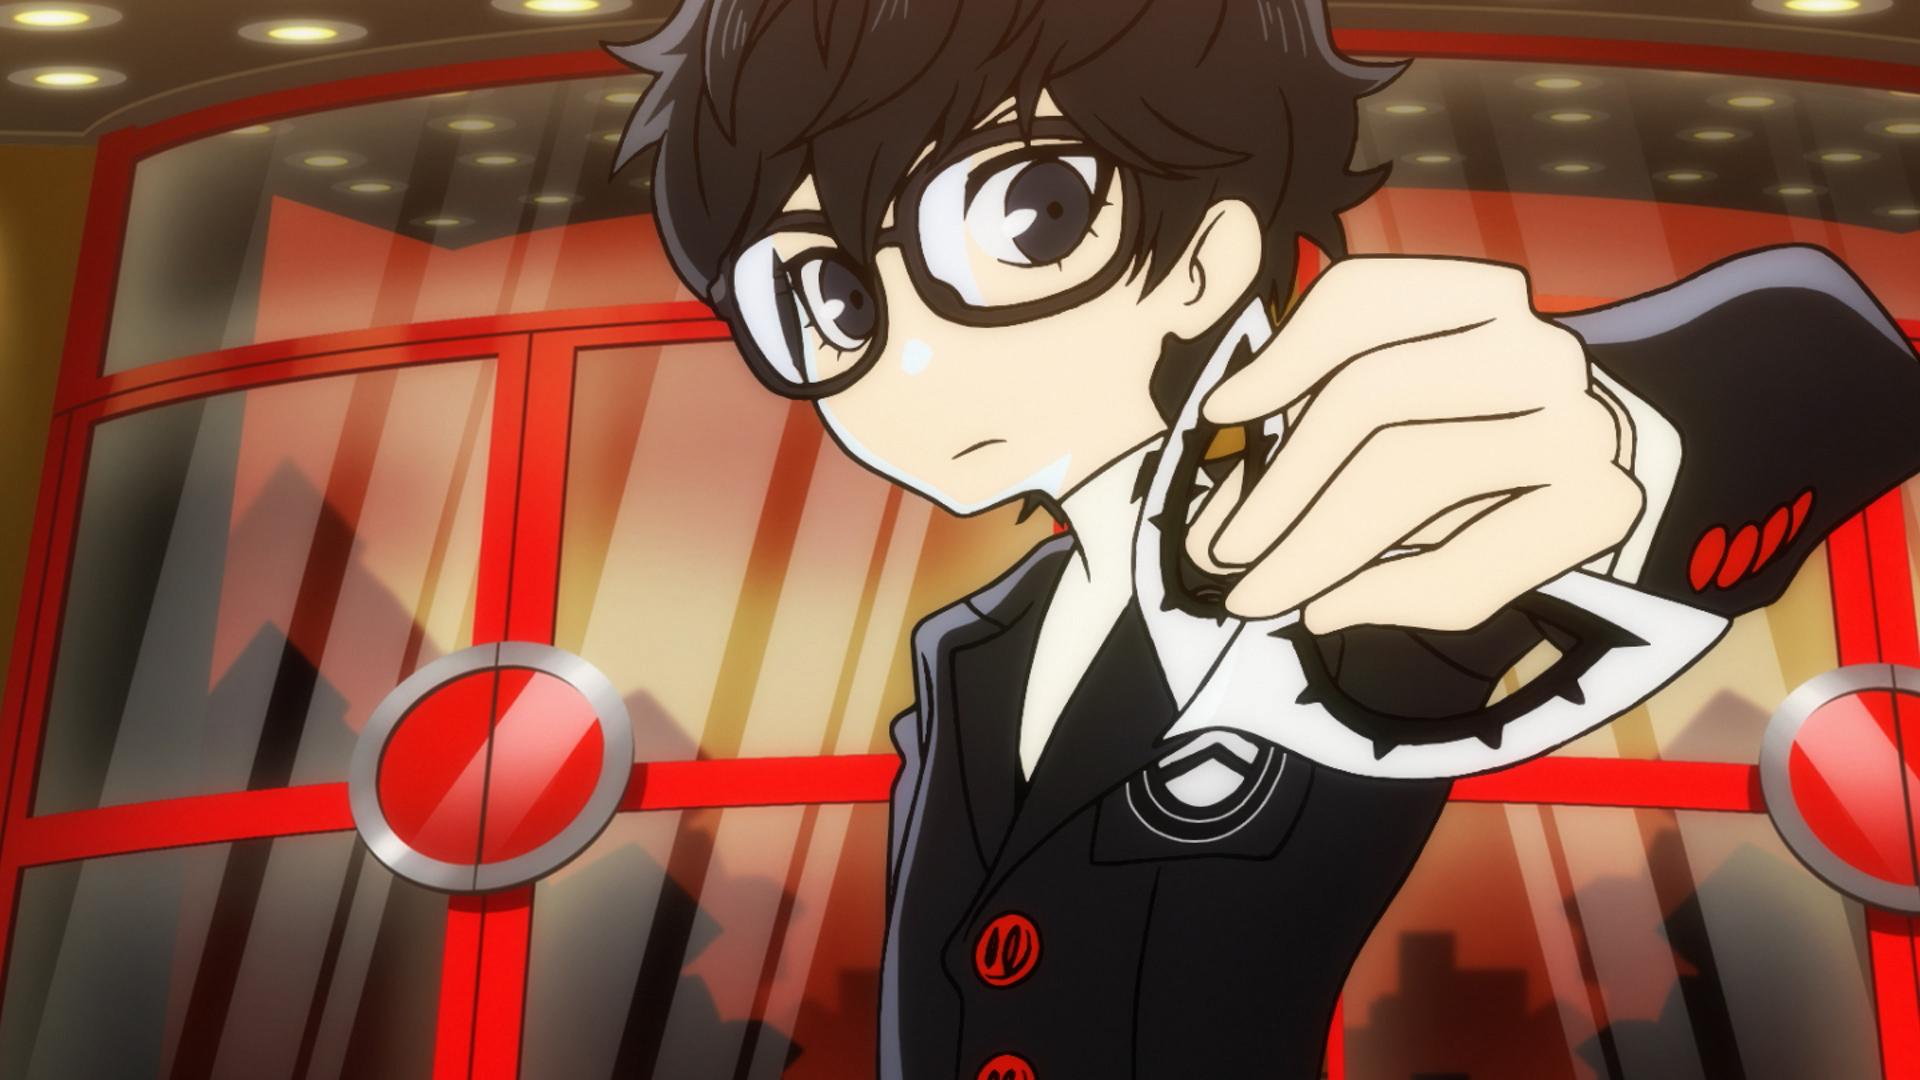 Persona Q2 coming to Nintendo 3DS in June